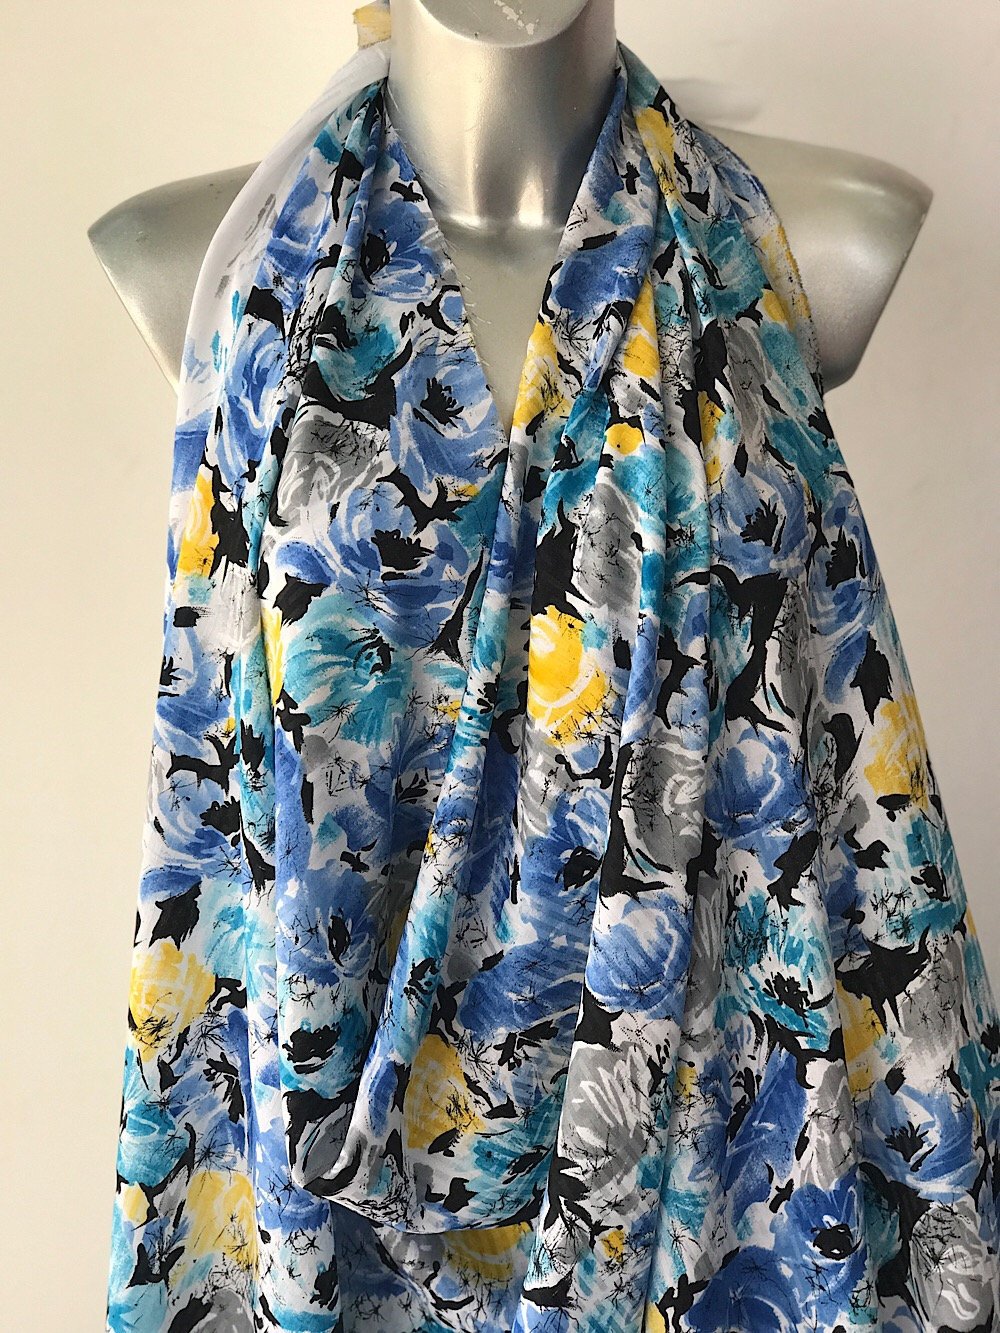 polyester print fabric for summer dress jacquard base floral print blue yellow white 140cm wide